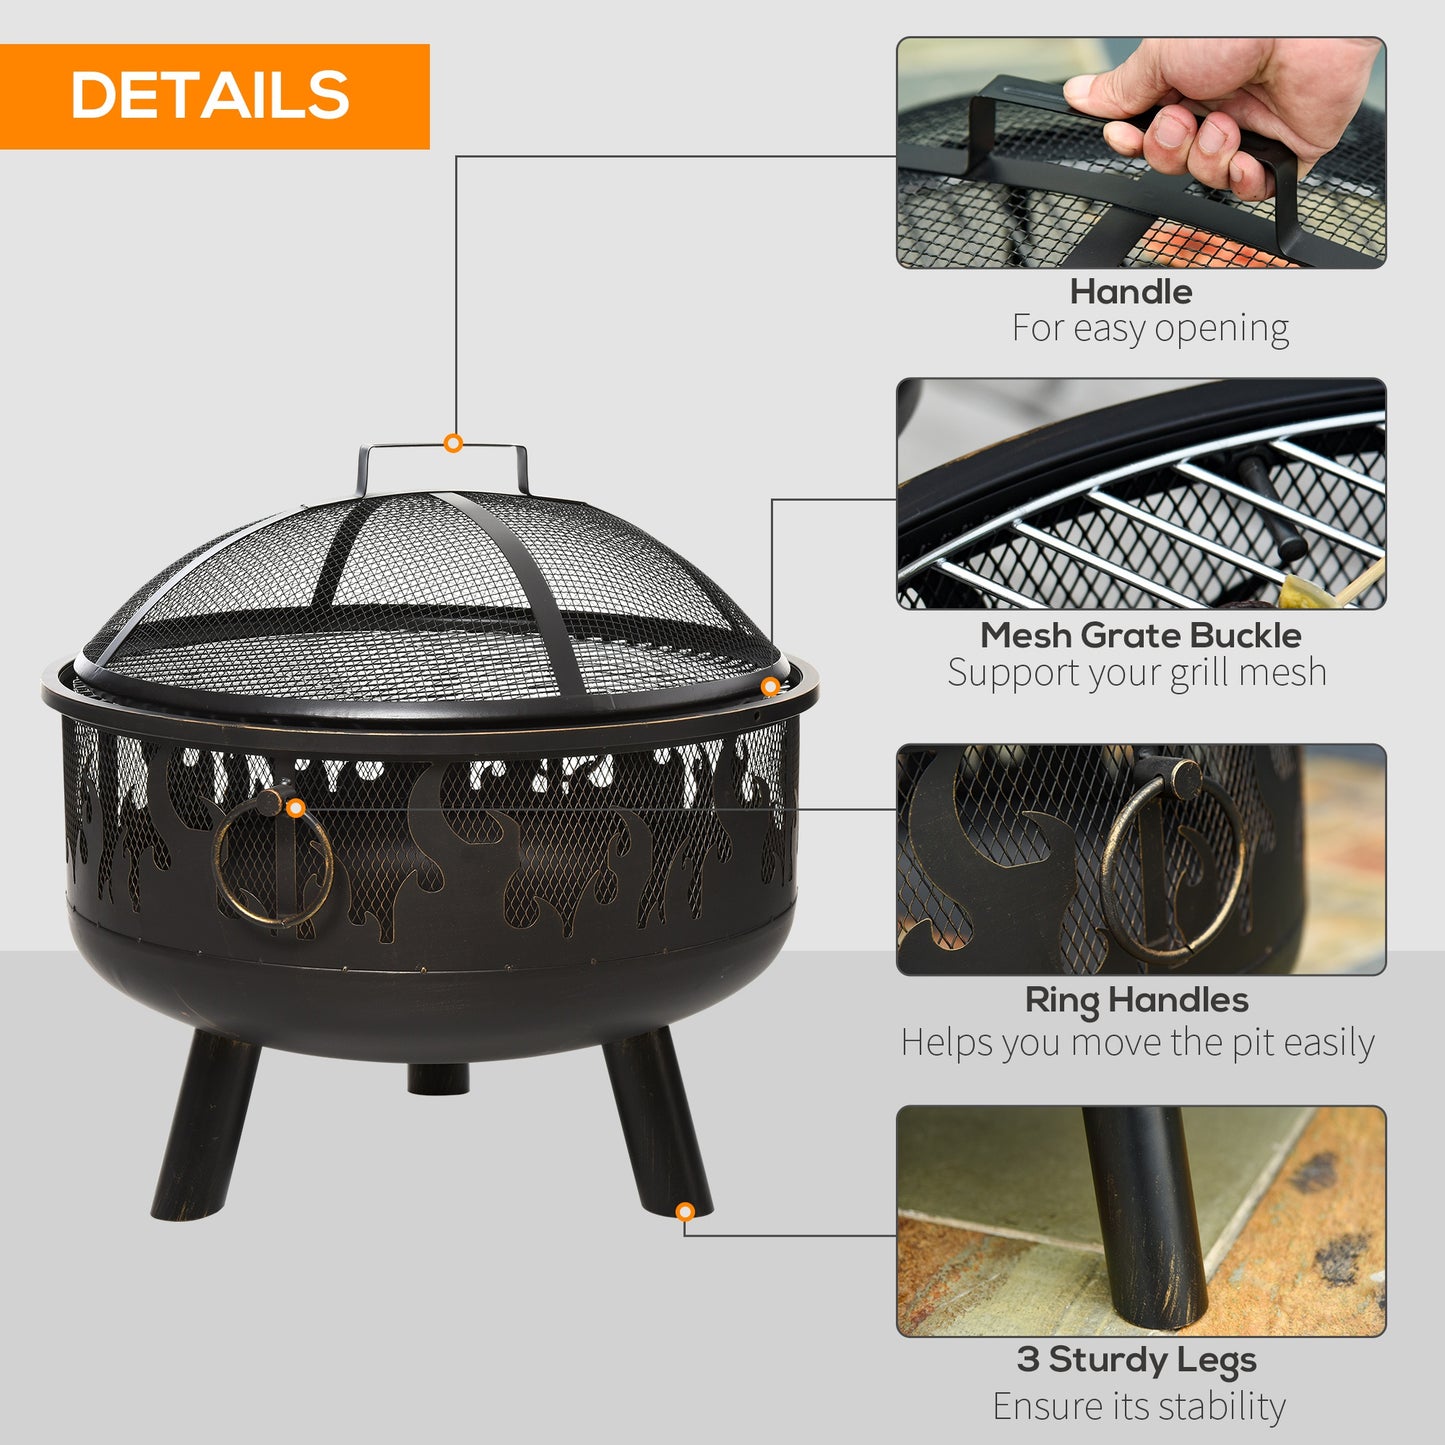 Outsunny Outdoor Fire Pit with Grill Cooking Grate W/ Cover Fire Poker Yard Bonfire Patio